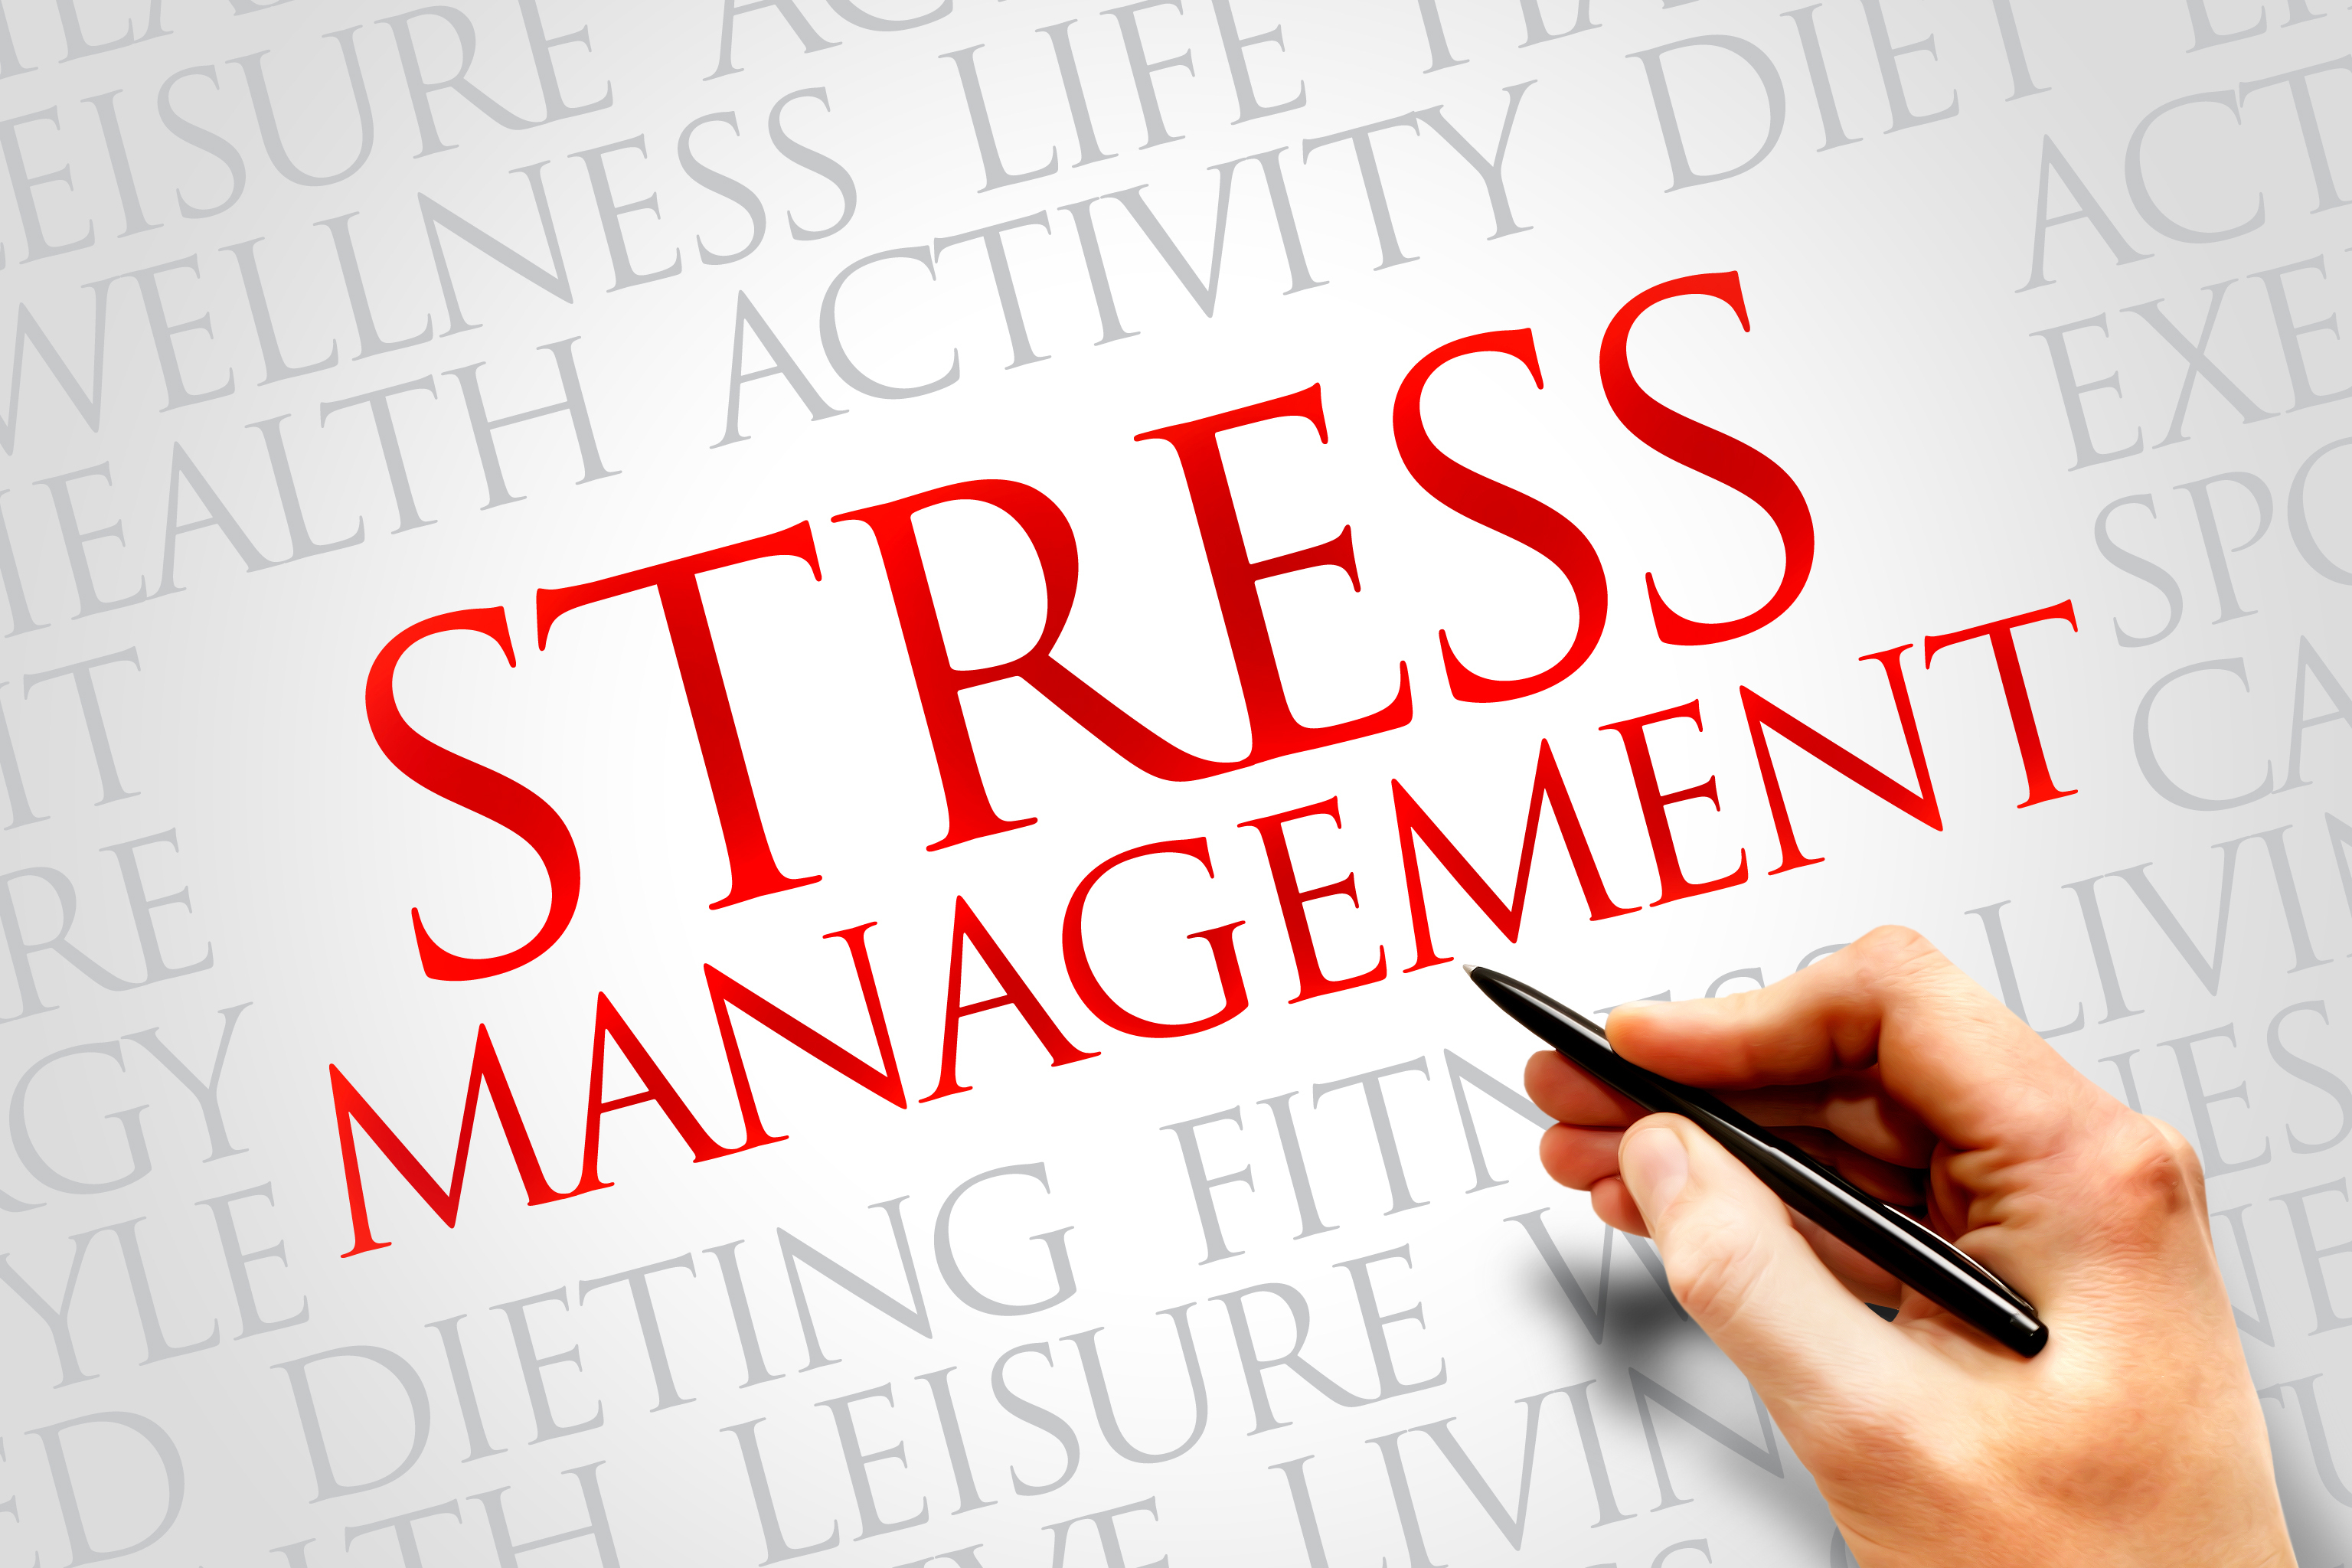 PELATIHAN TIME AND STRESS MAaNAGEMENT IN WORKPLACE